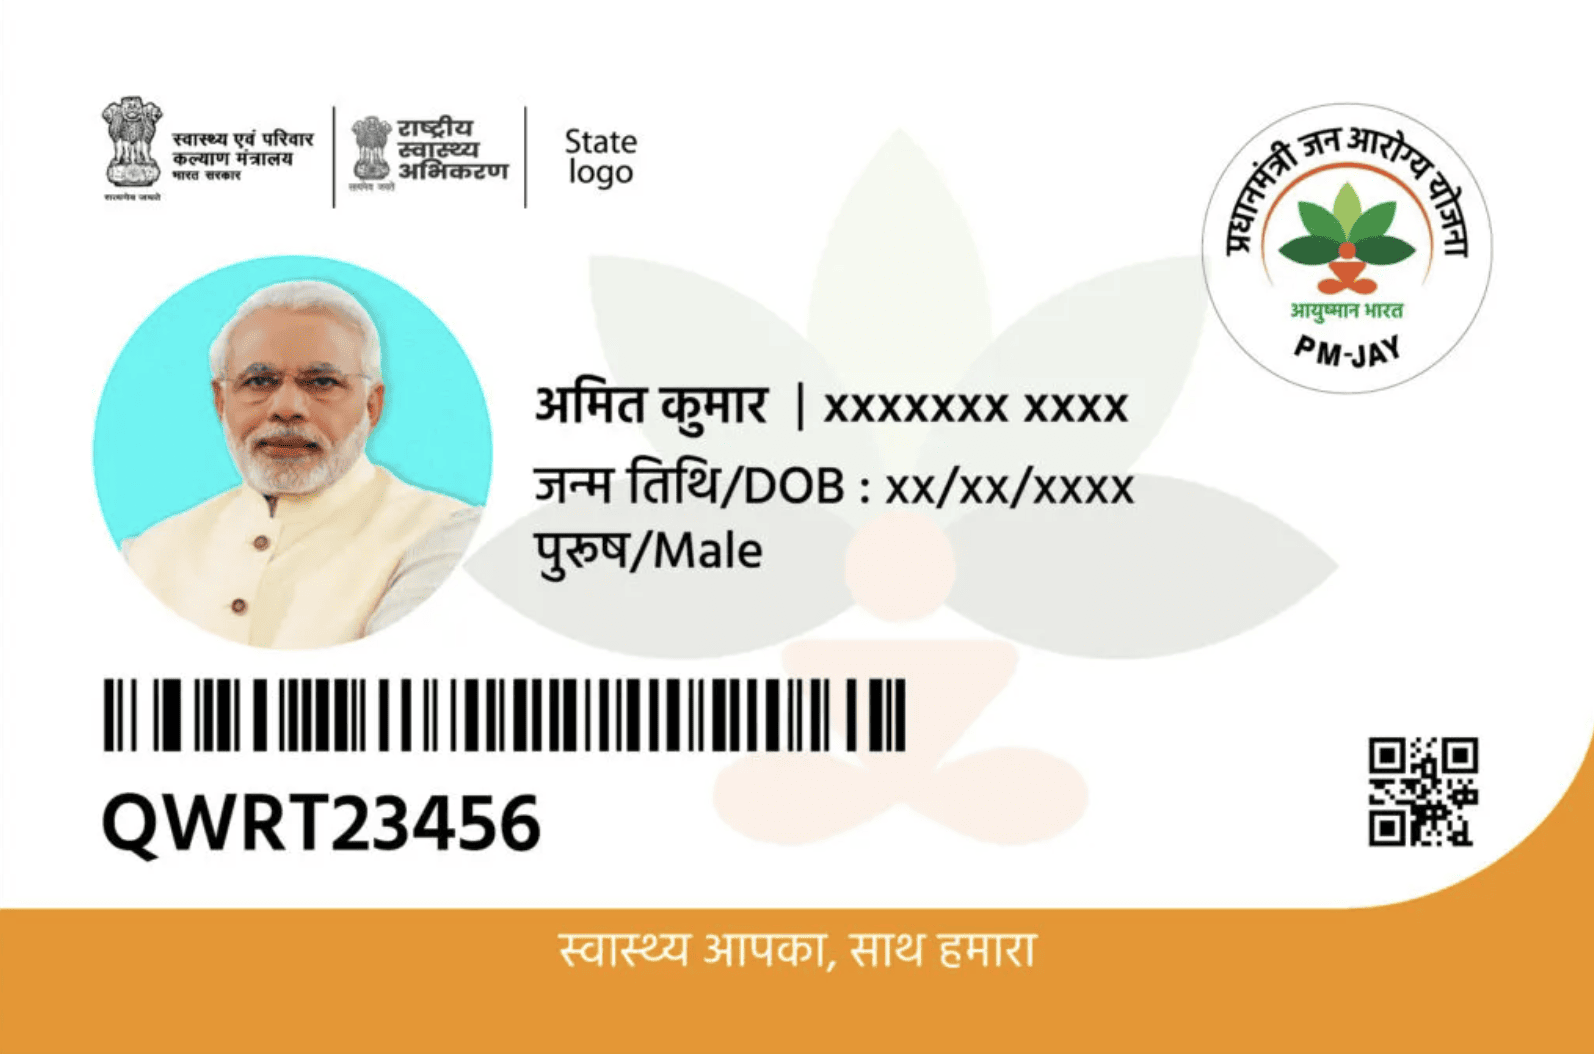 MA Amrutam Card: Knowing its Benefits, Enrolment, Coverage and Access